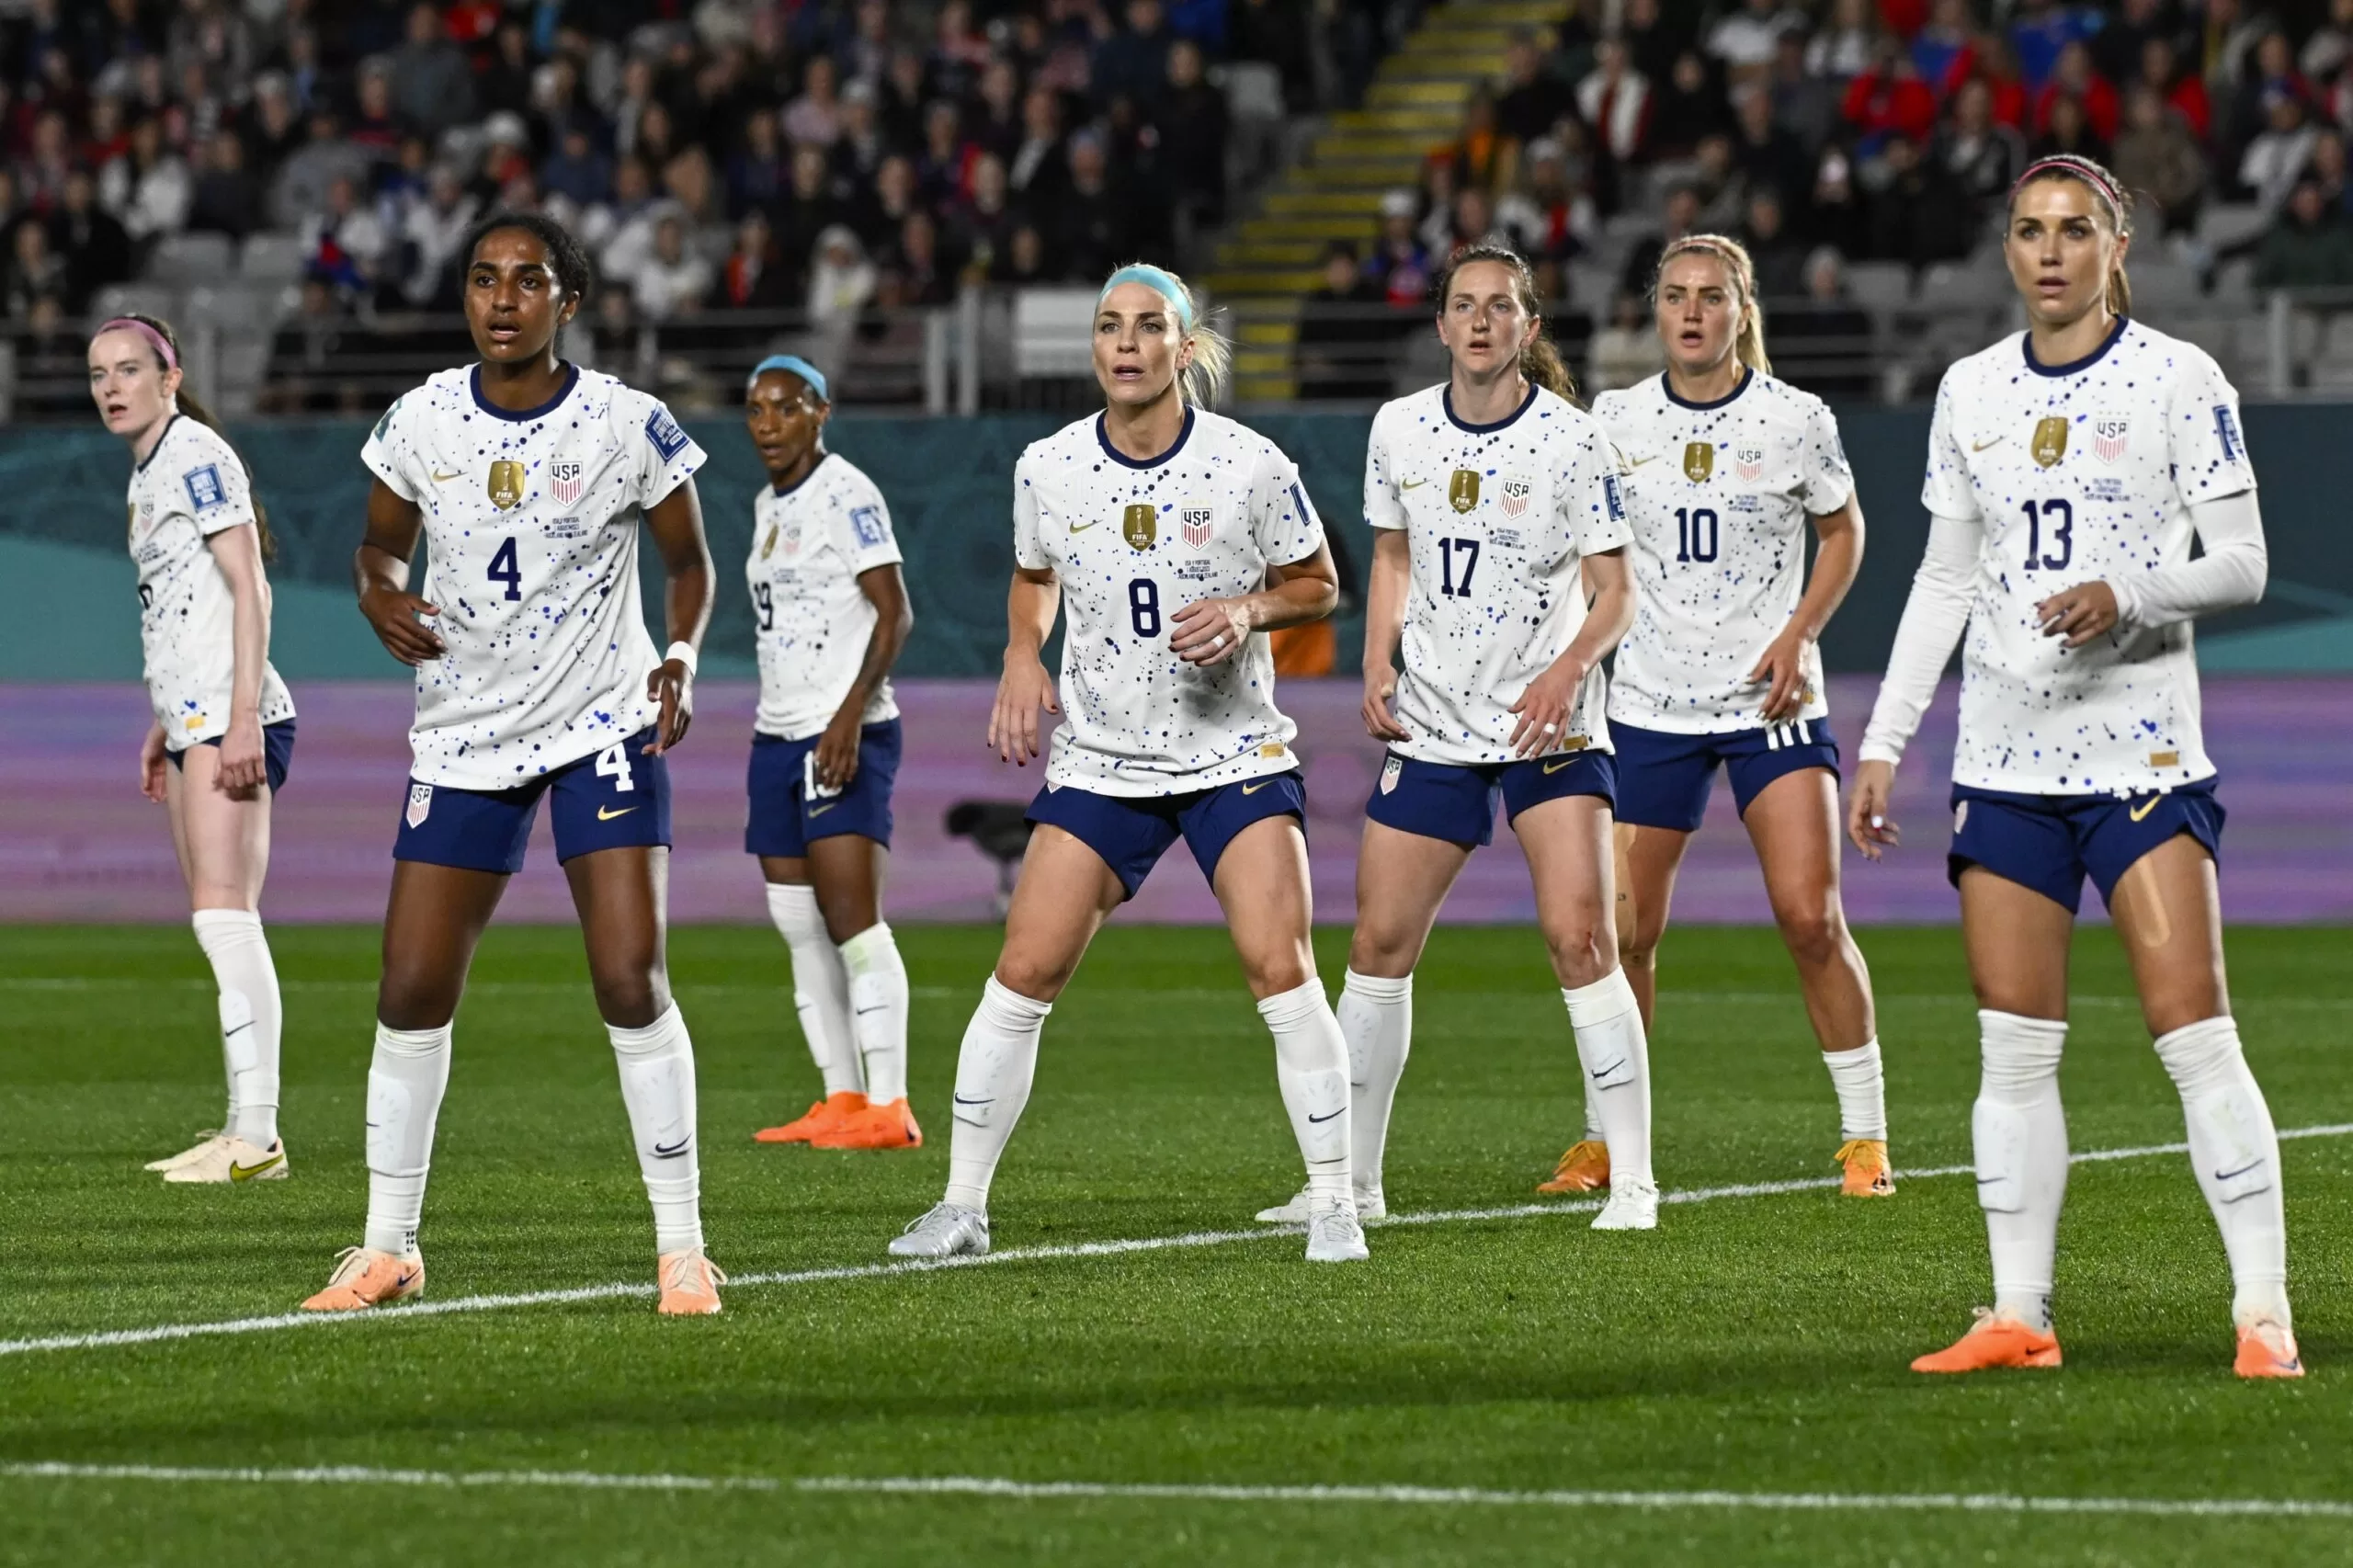 The US lacks that 2019 magic at this Women’s World Cup
